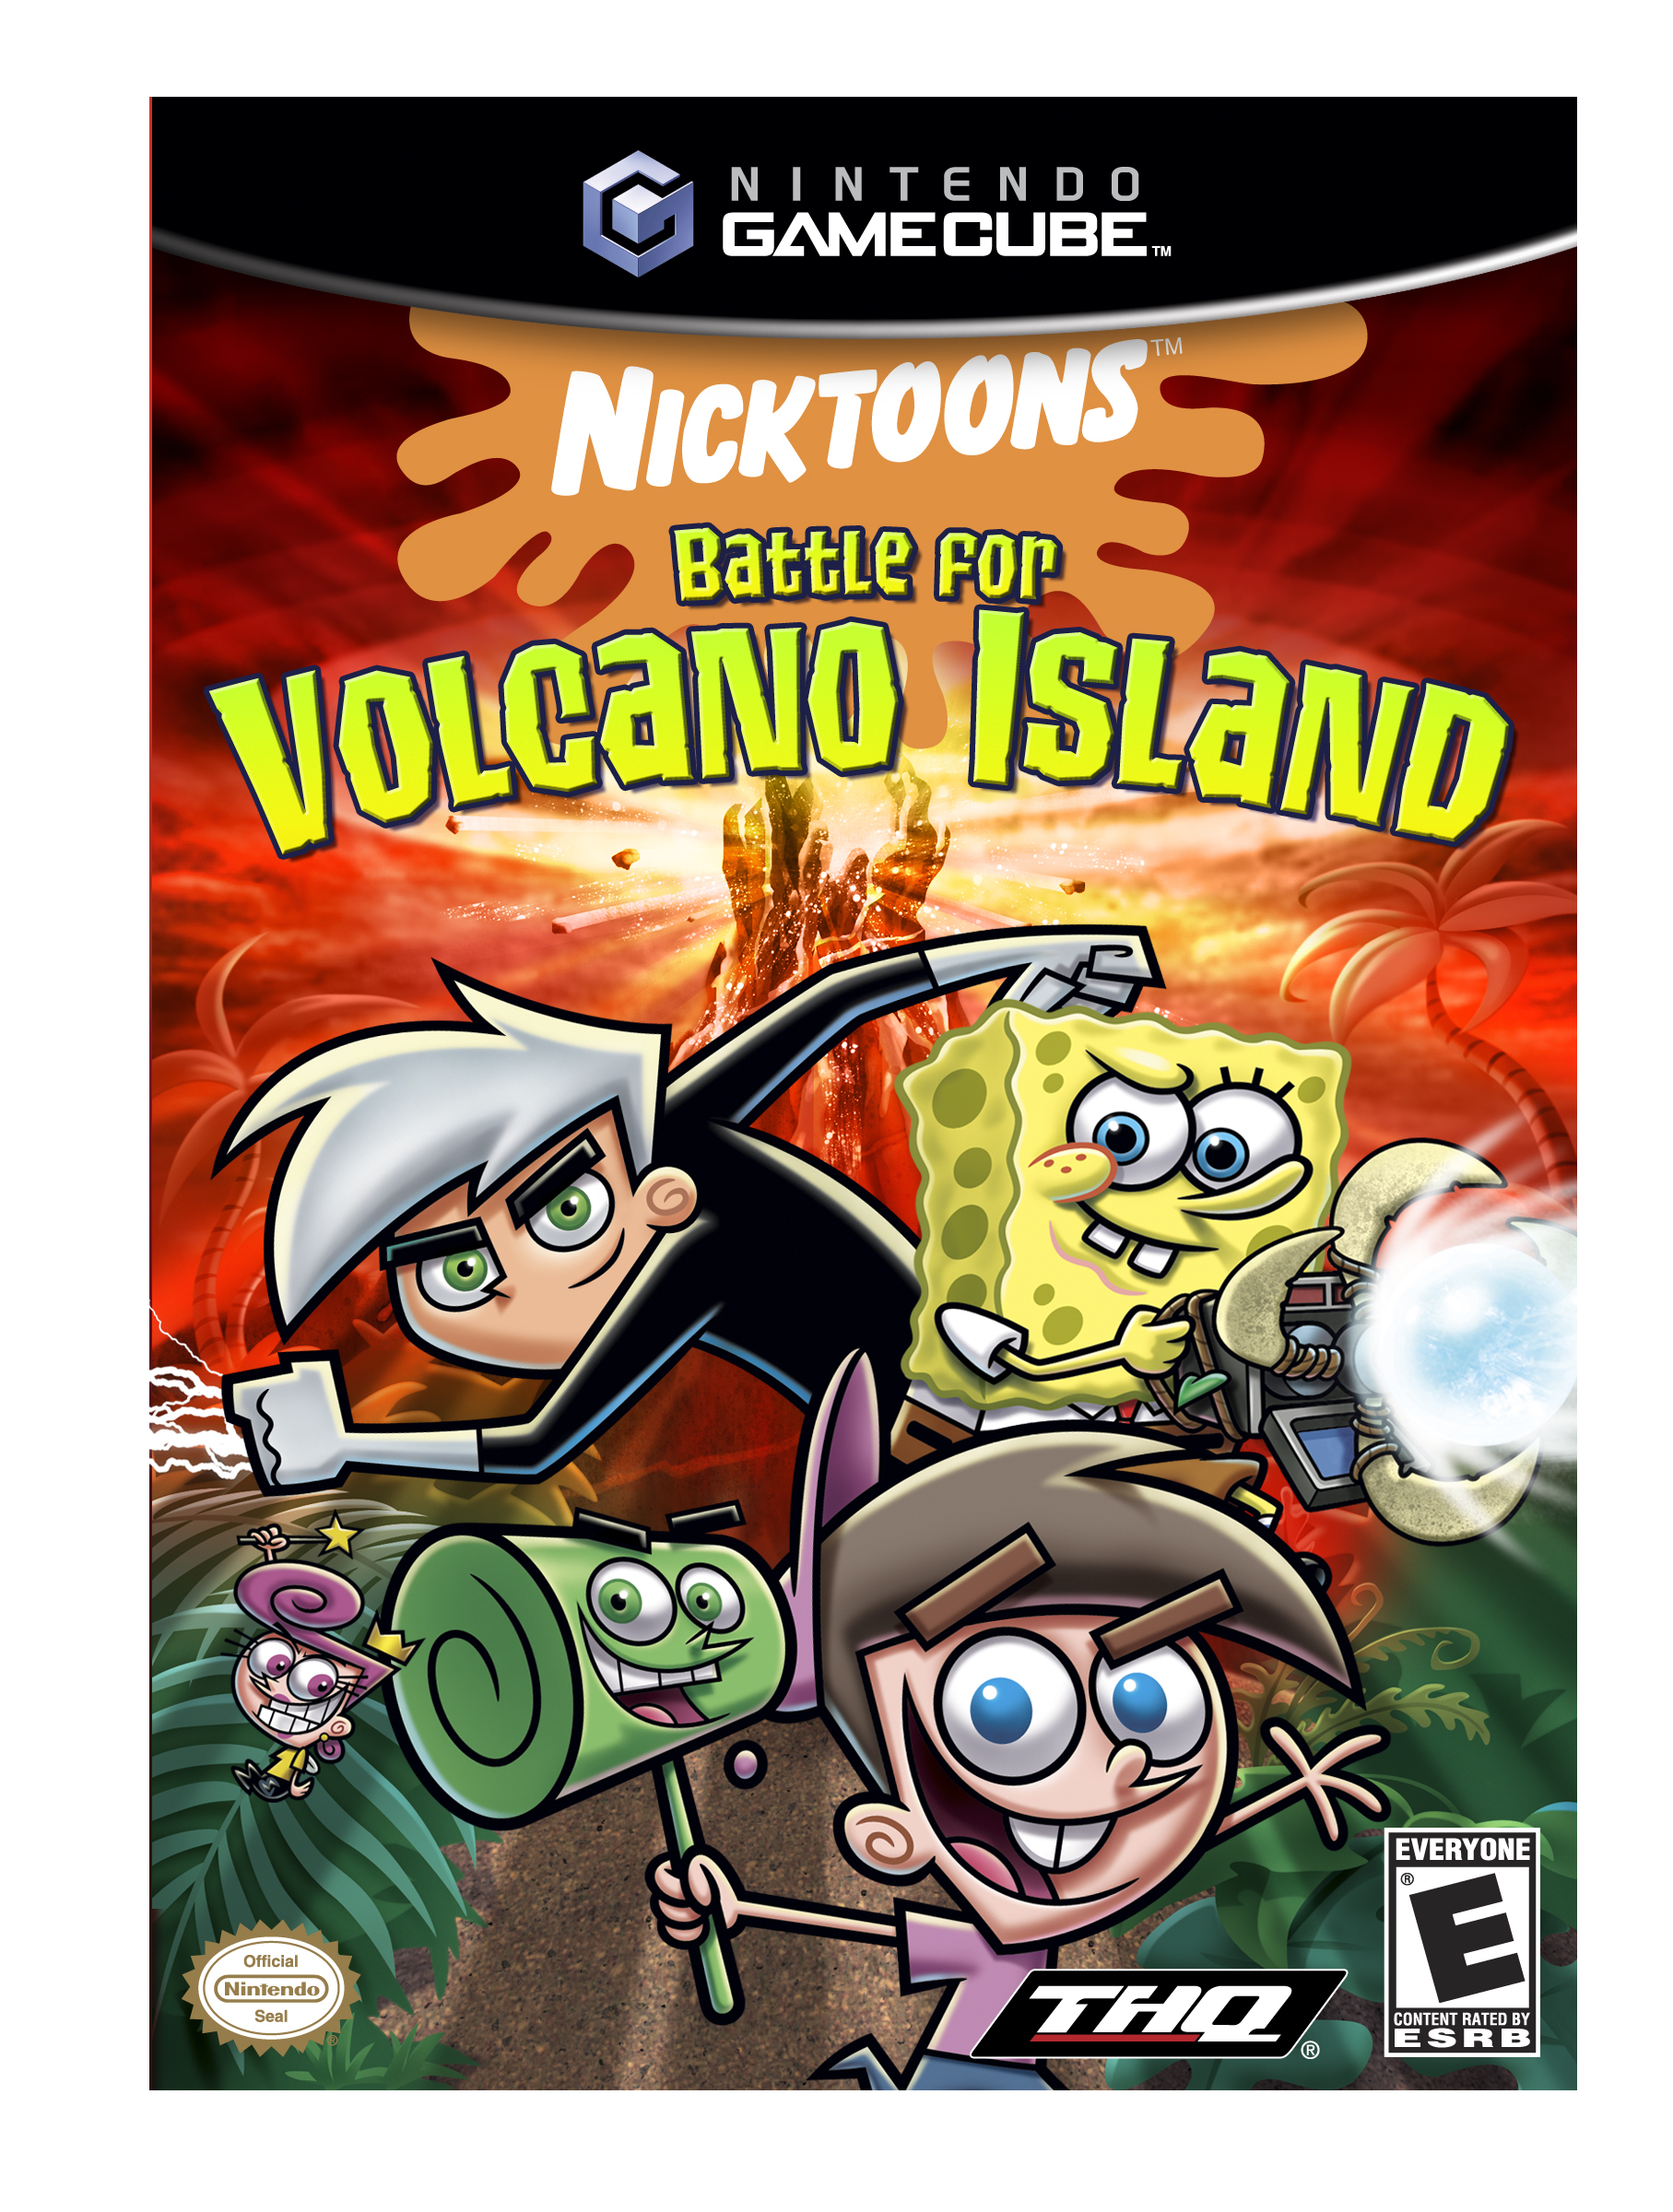 Nicktoons Timmy Turner Games on Family Friendly Gaming Nicktoons Battle For Volcano Island   Nicktoons